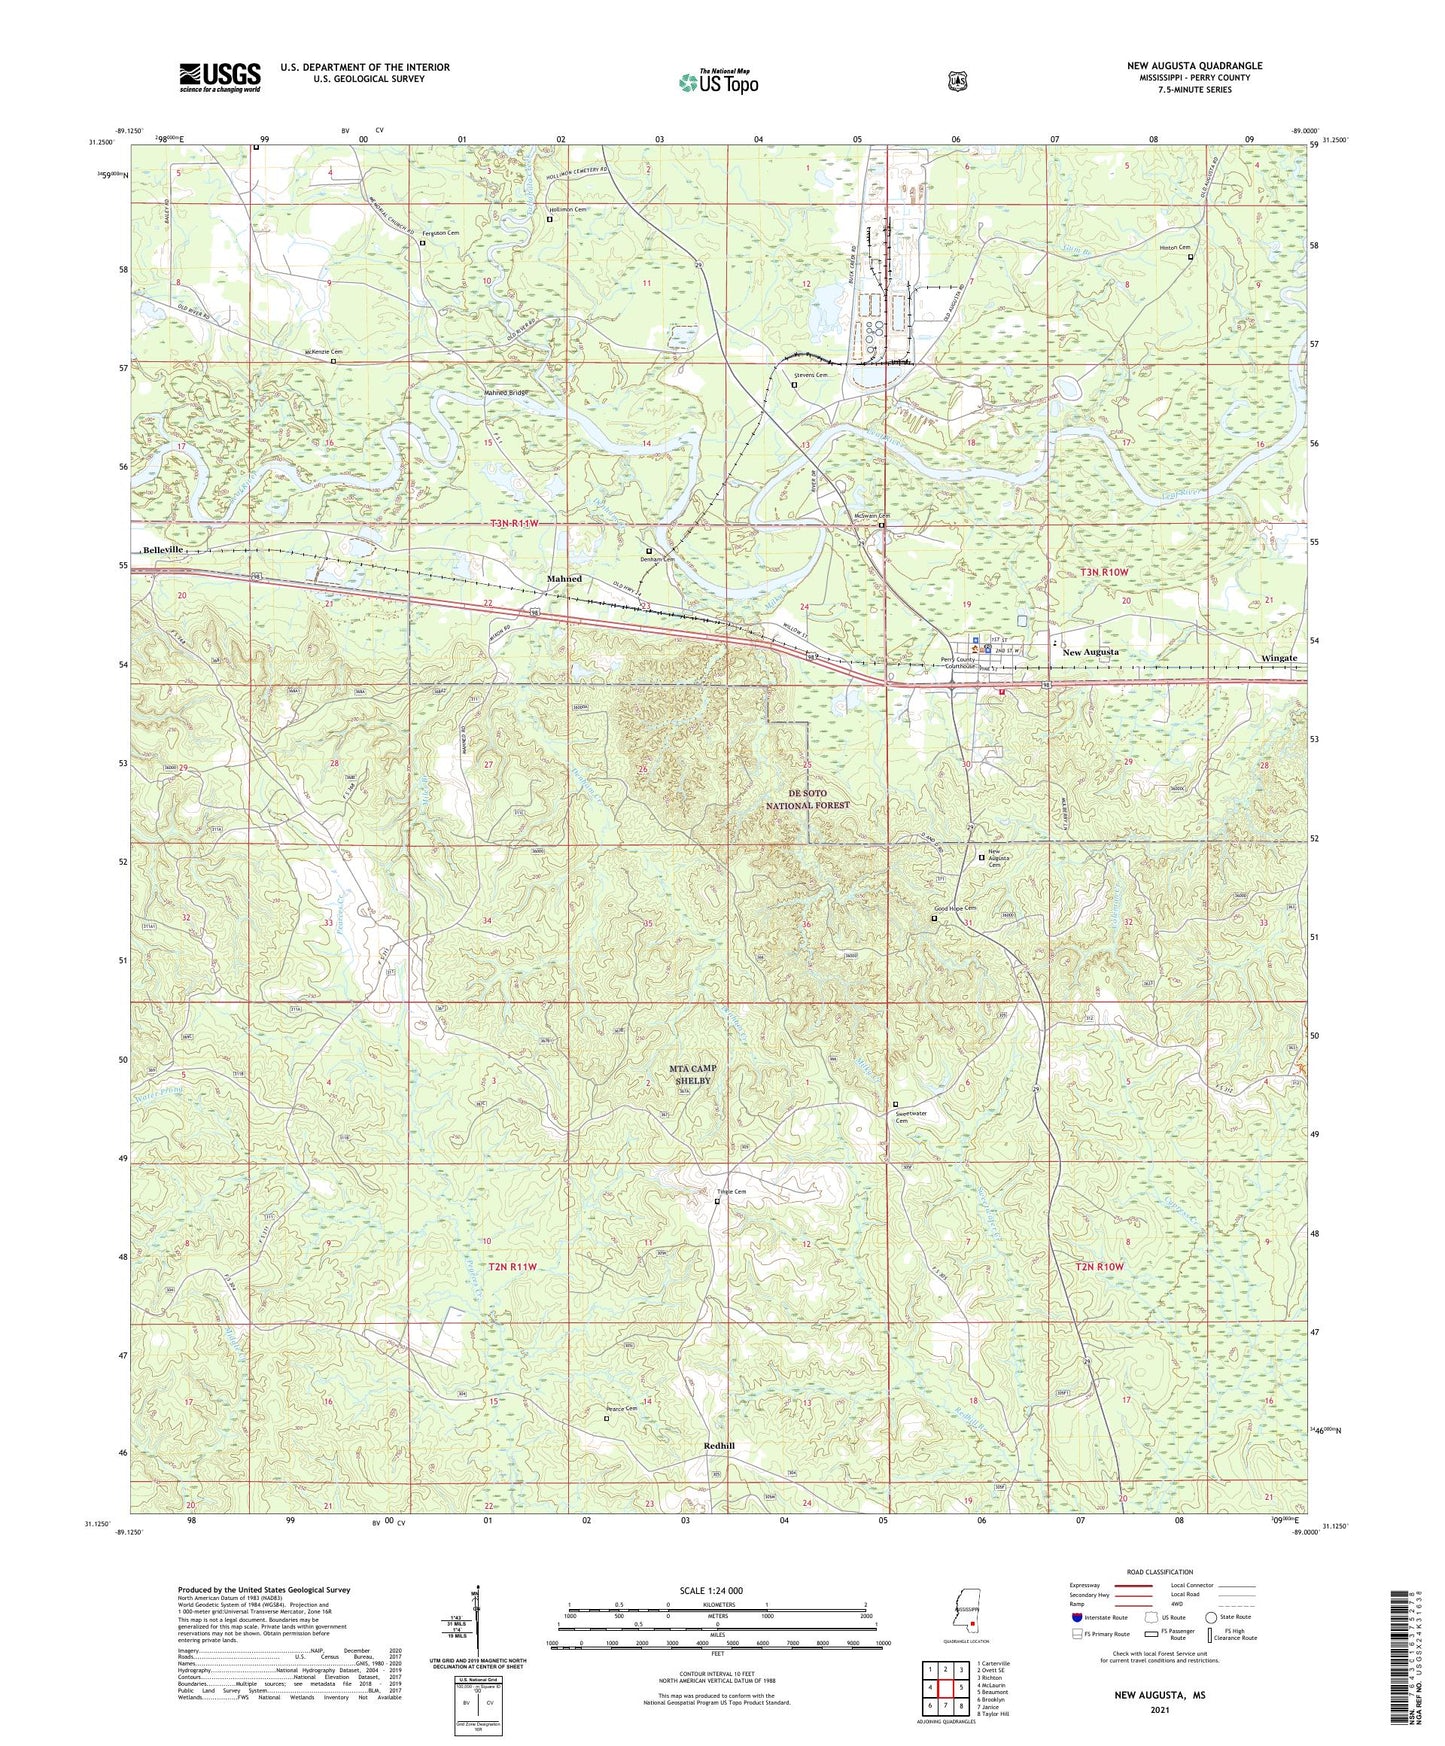 New Augusta Mississippi US Topo Map Image